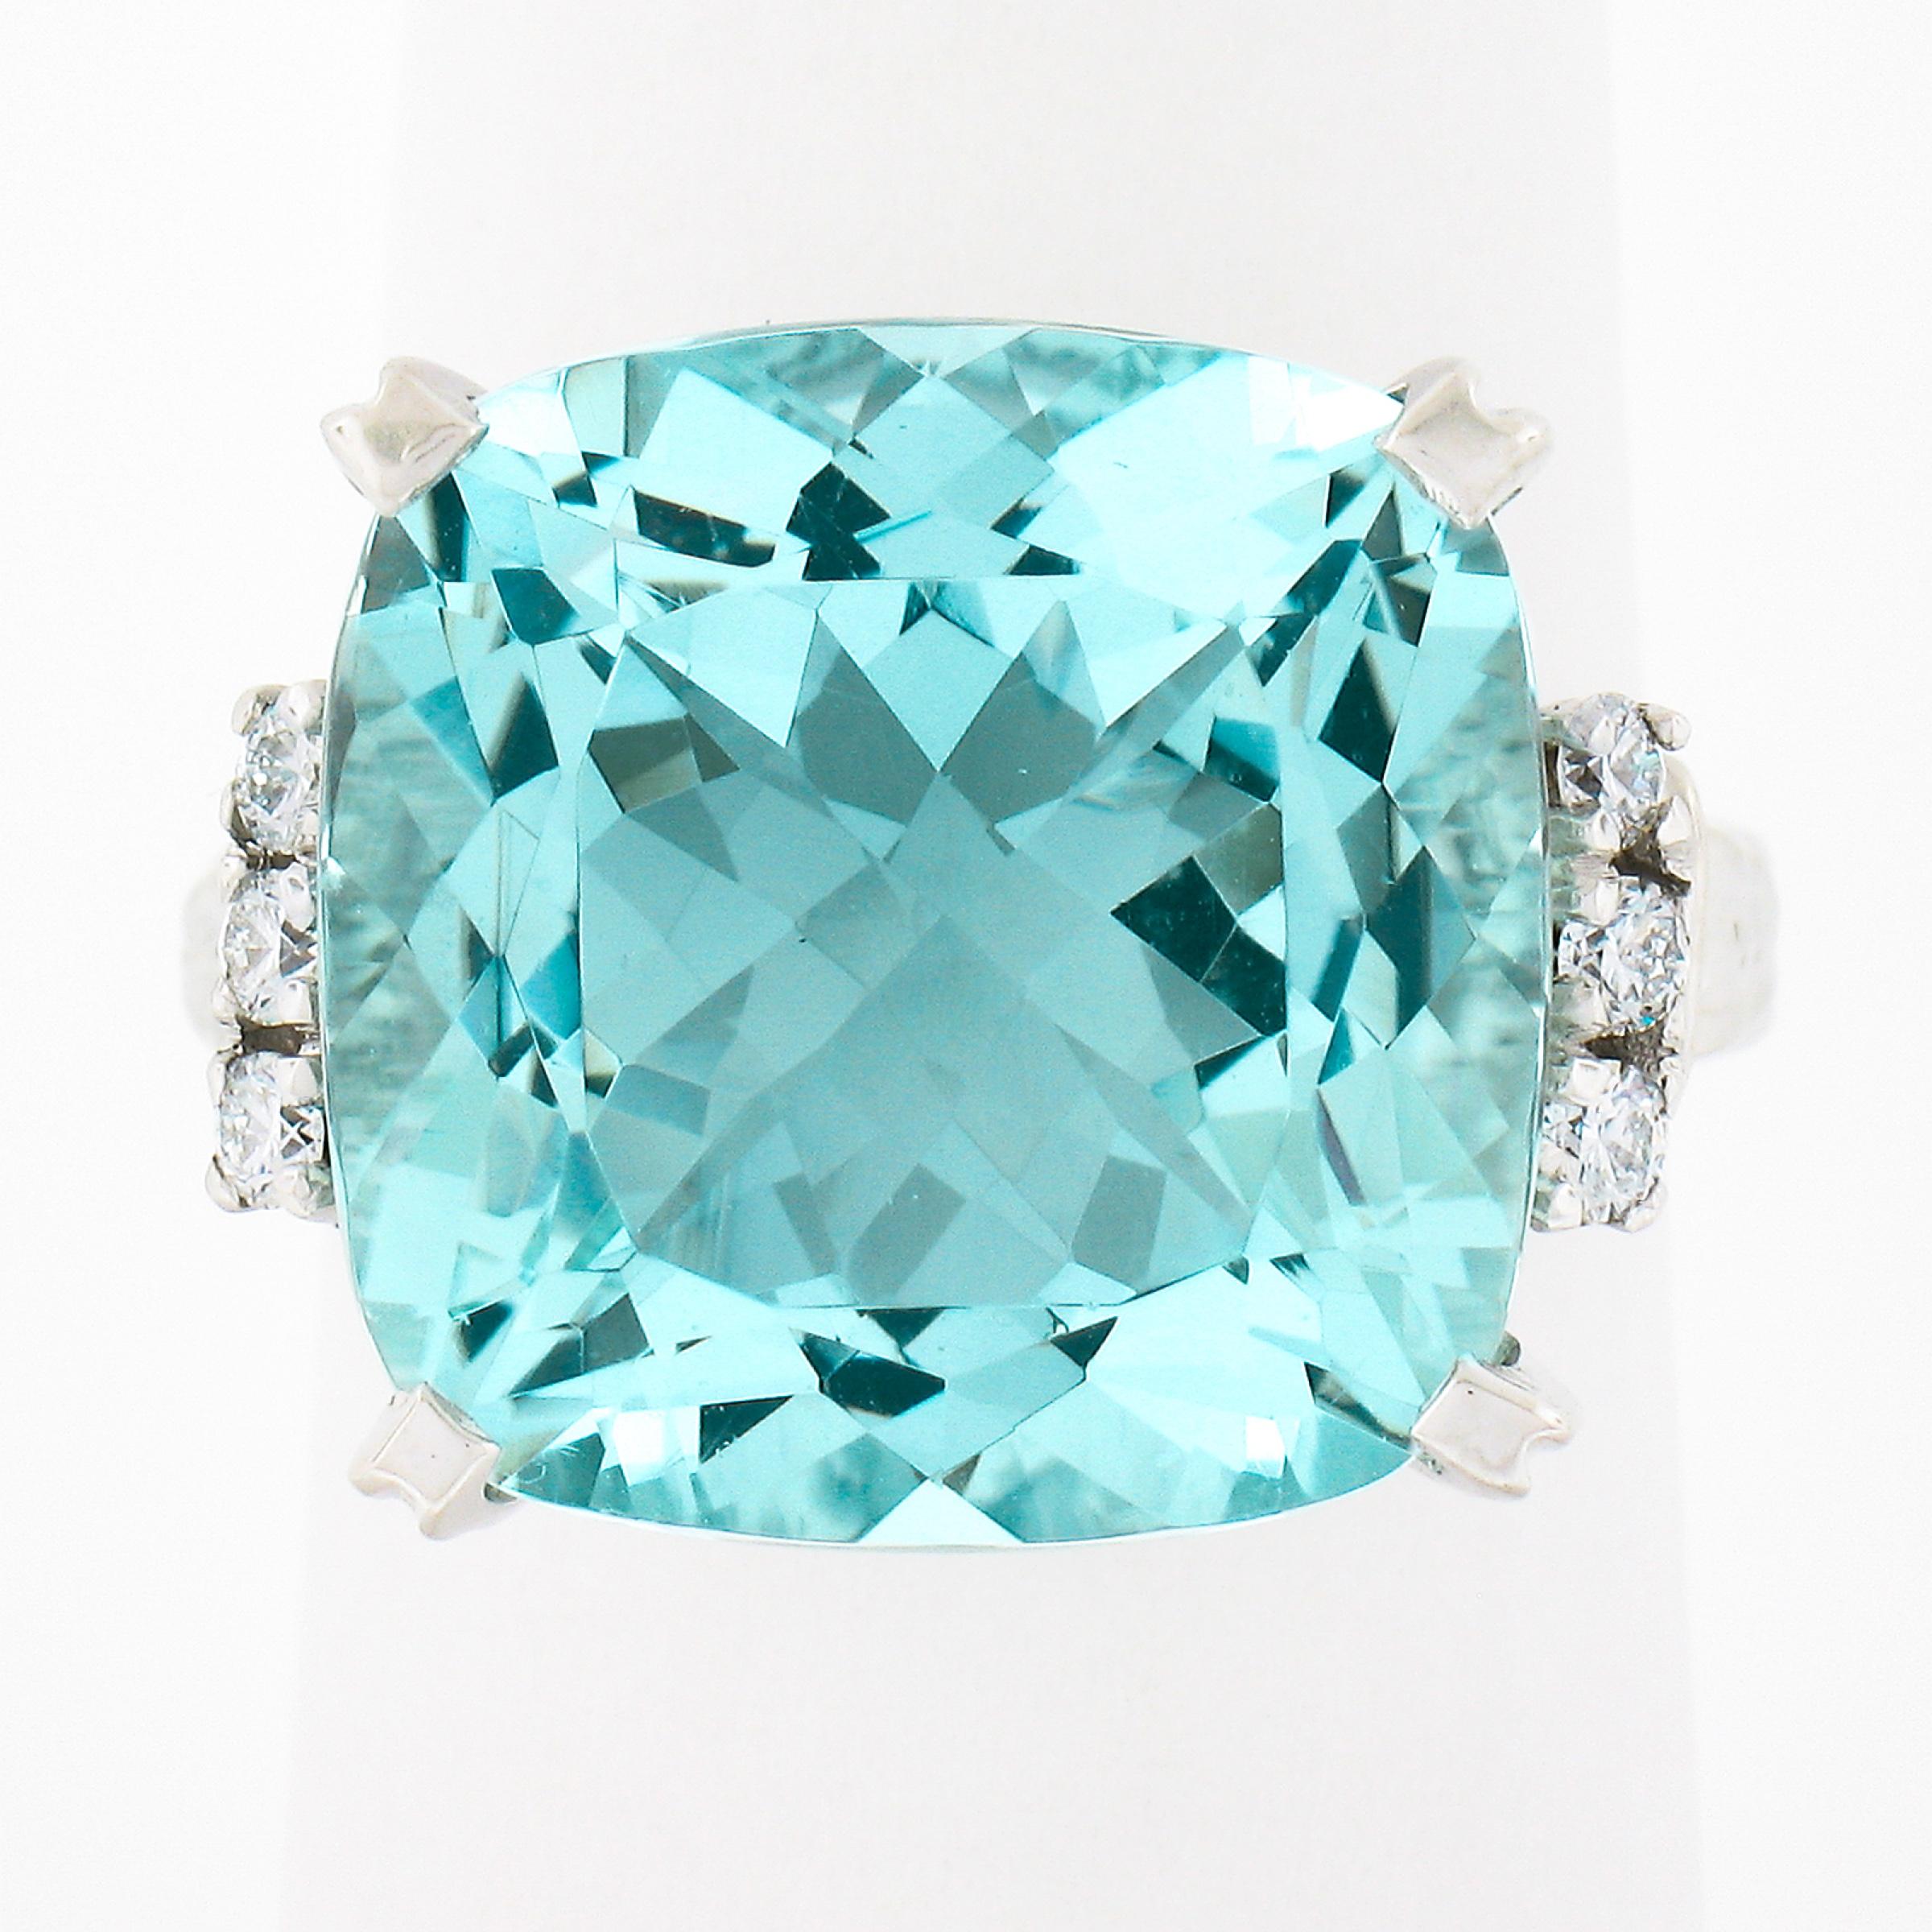 Up for sale we have an absolutely stunning, GIA certified, aquamarine and diamond cocktail ring. The very fine quality aquamarine is a large square cushion cut stone, weighing approximately 12.76 carats, with the most outstanding and soothing light